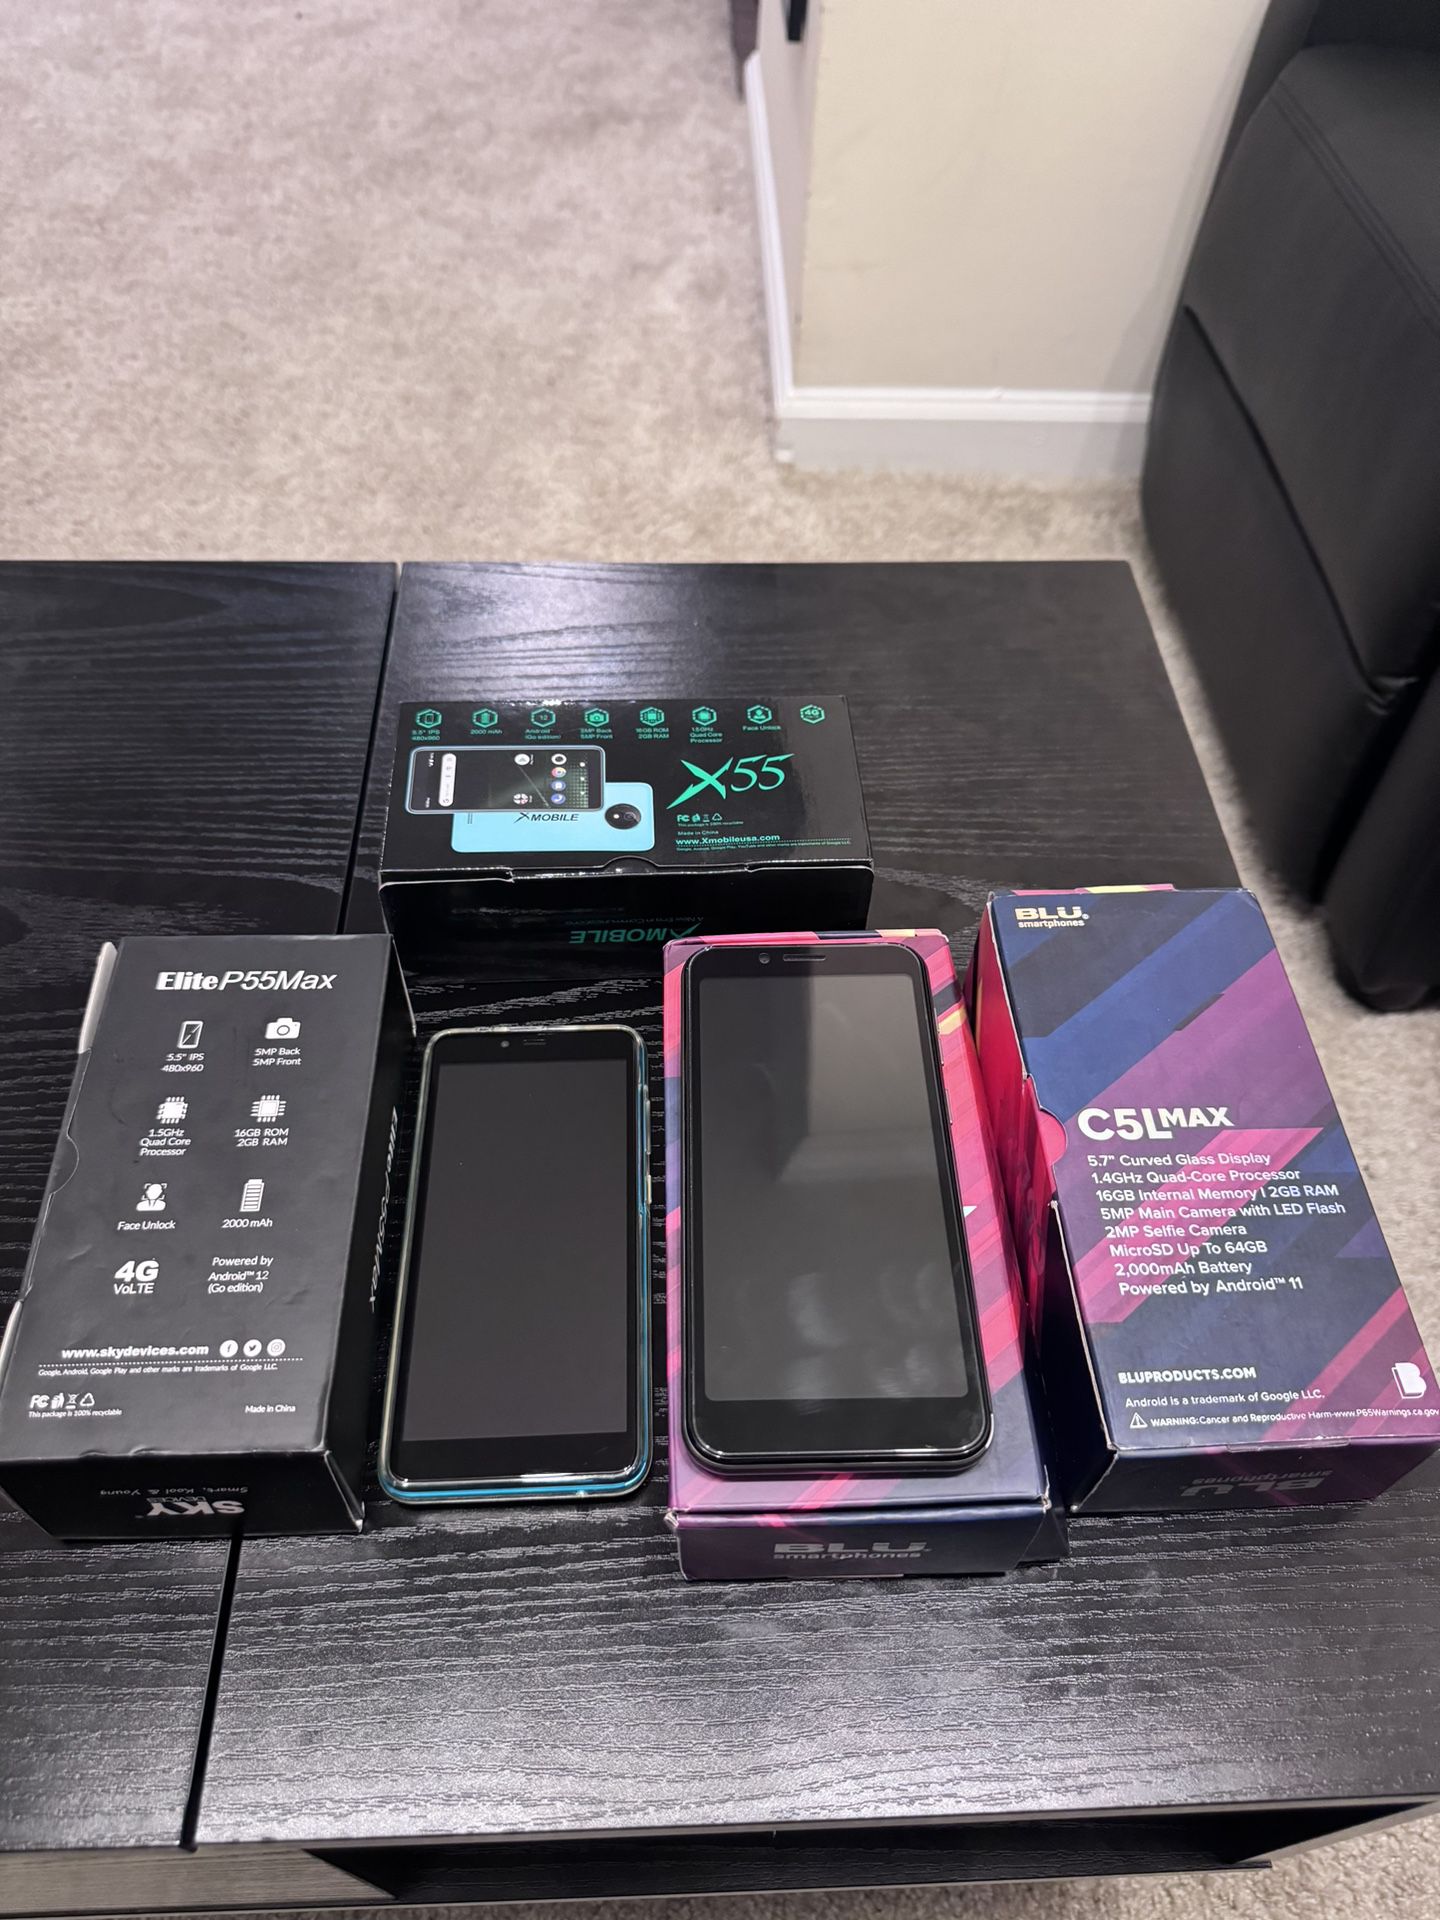 Unlocked android Smartphones/ with case!!! $40 EACH!!! Come get them now DONT MISS OUT!! Variety… 